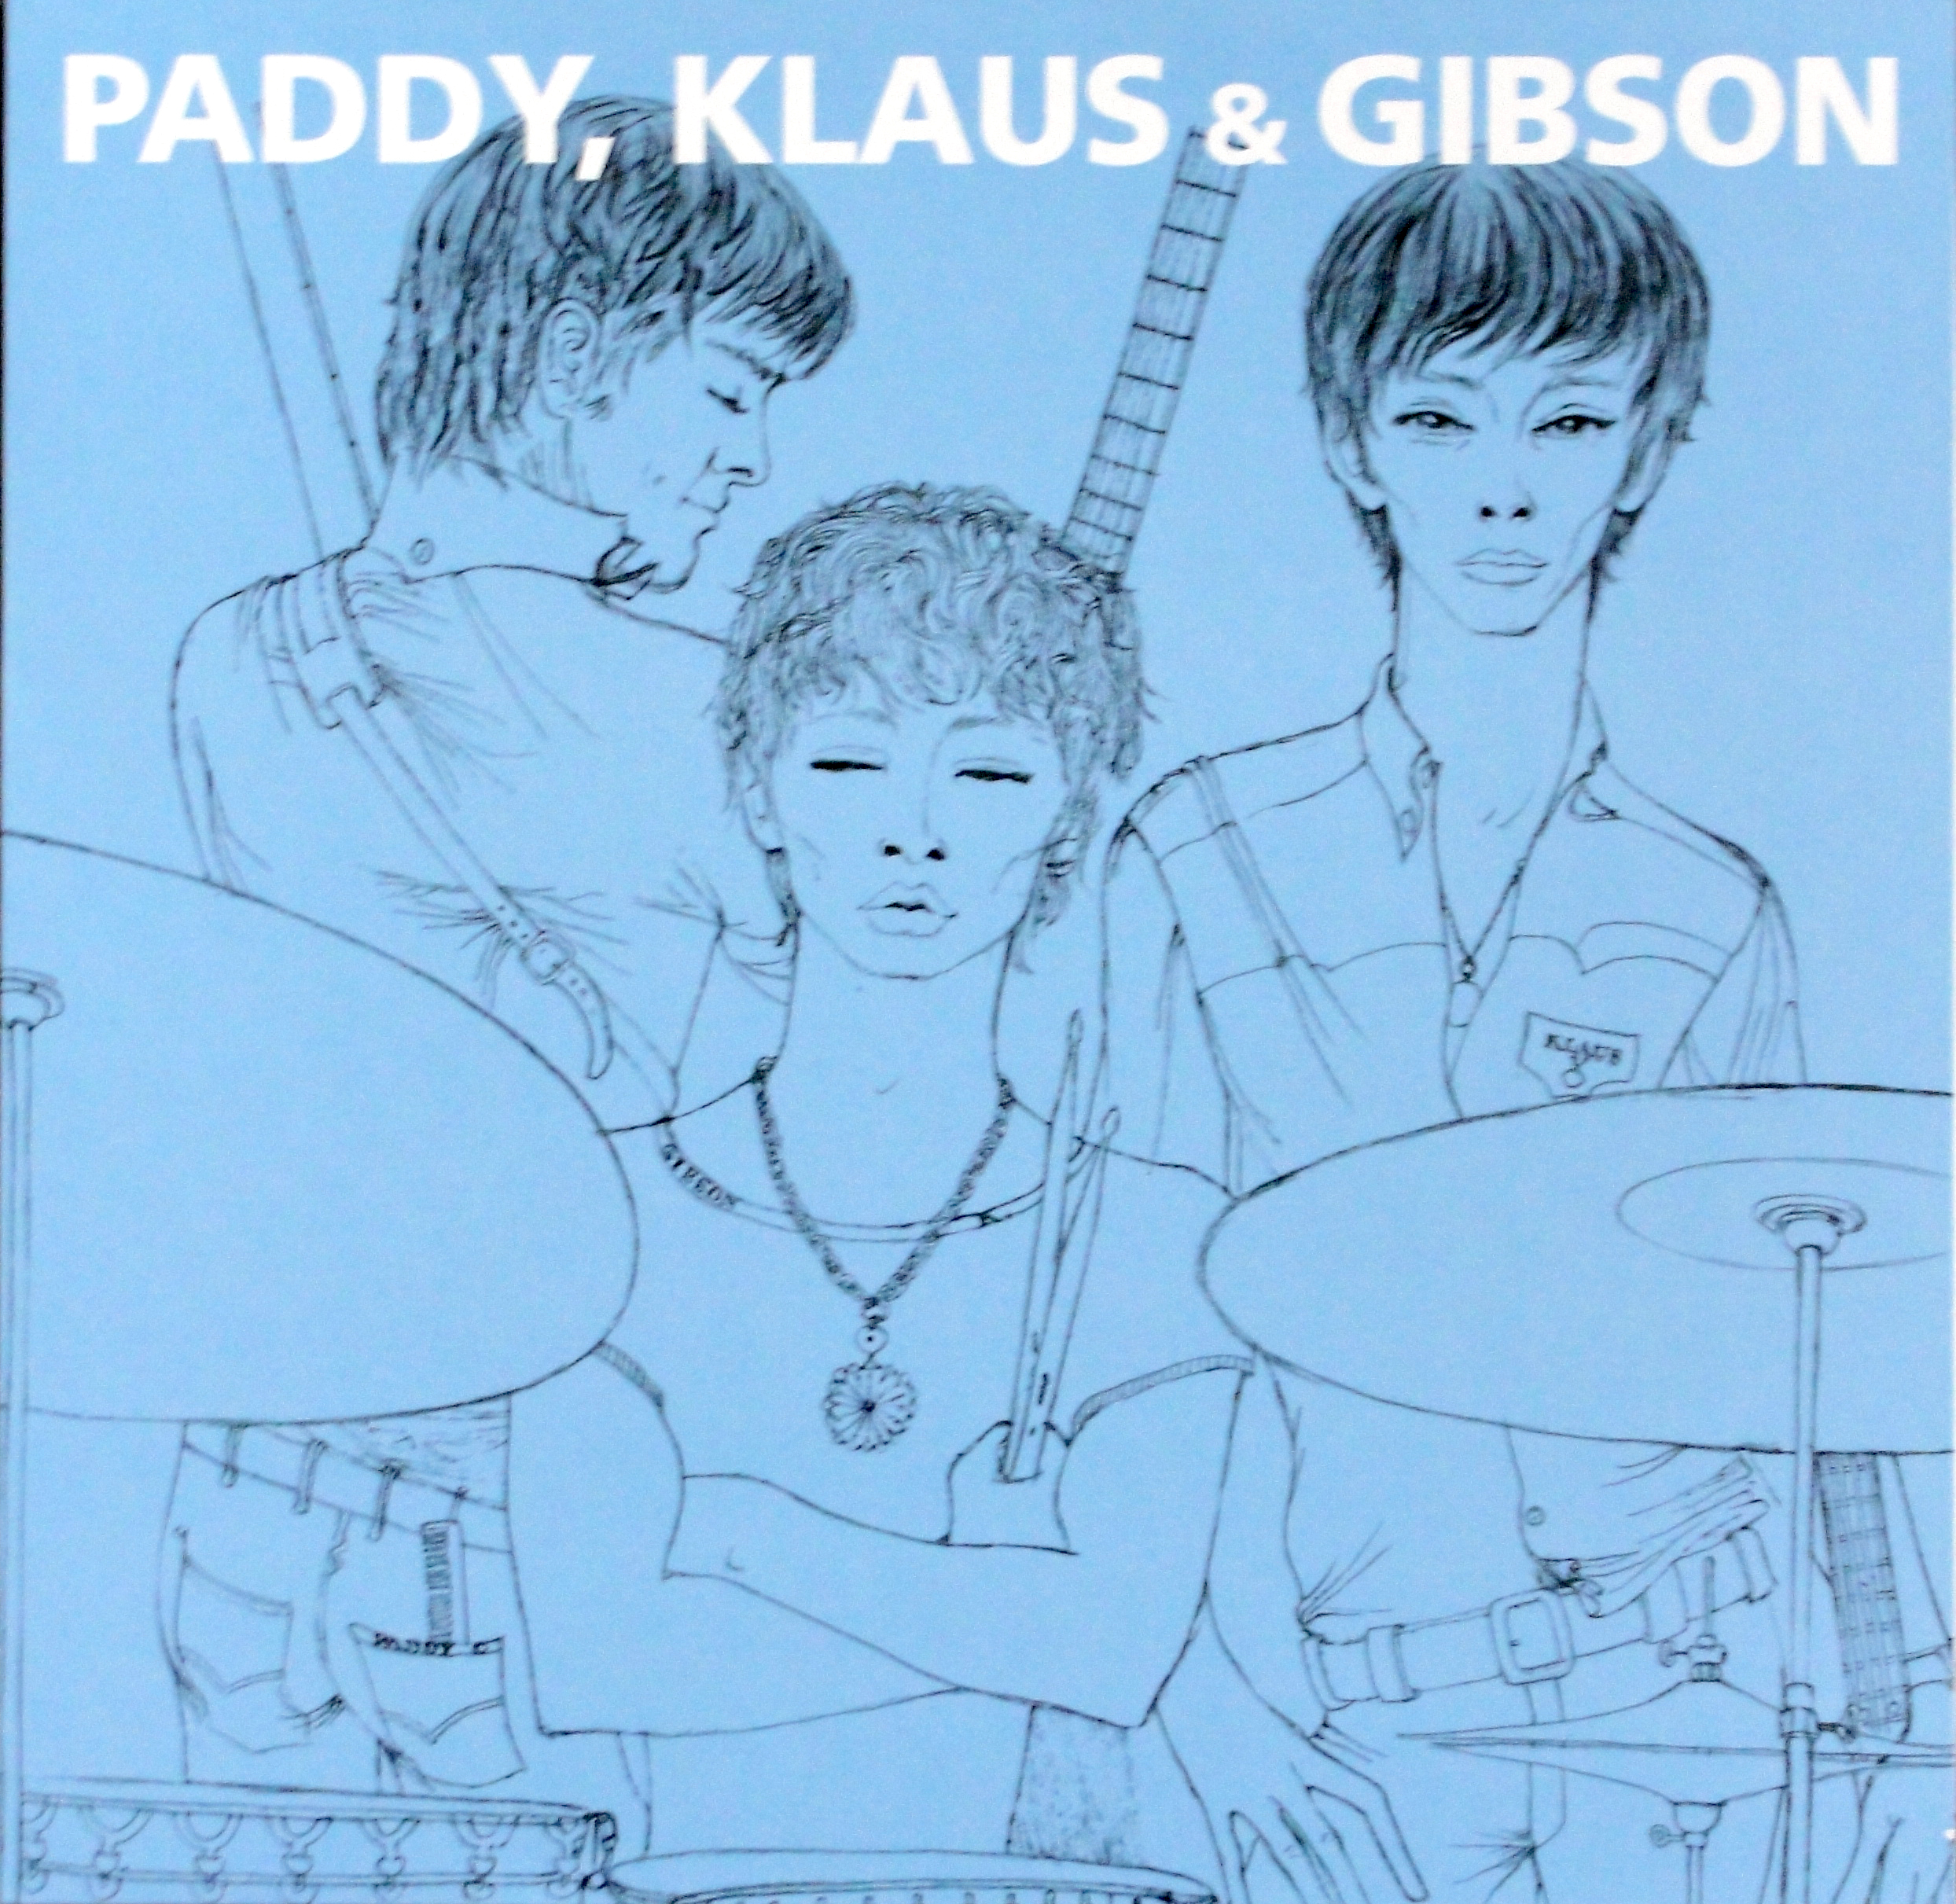 Paddy, Klaus & Gibson's 10